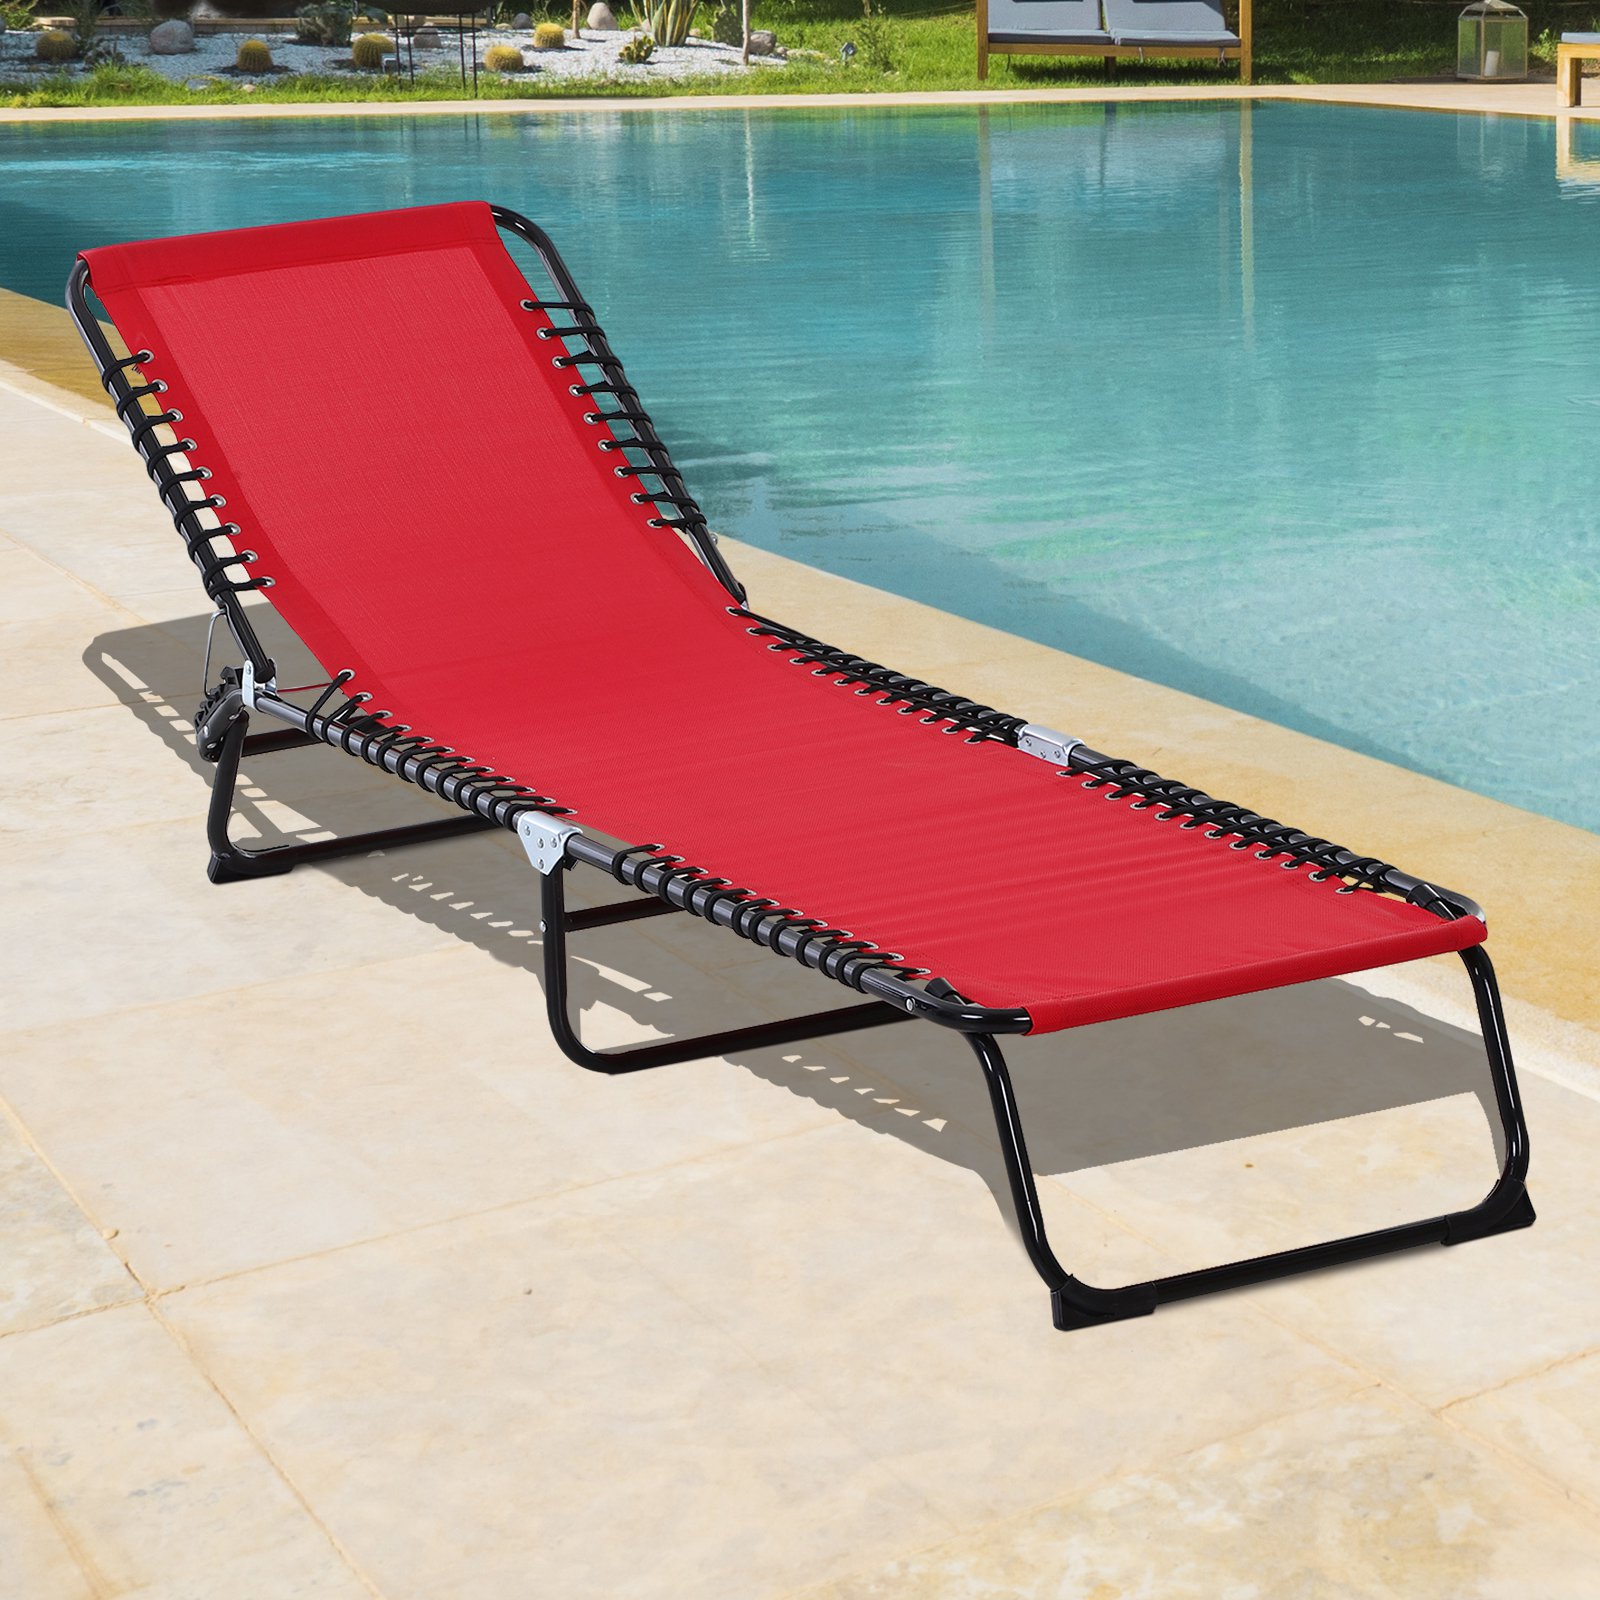 4-Position Reclining Beach Chair Chaise Lounge Folding Chair with Comfort Ergonomic Design - Wine Red